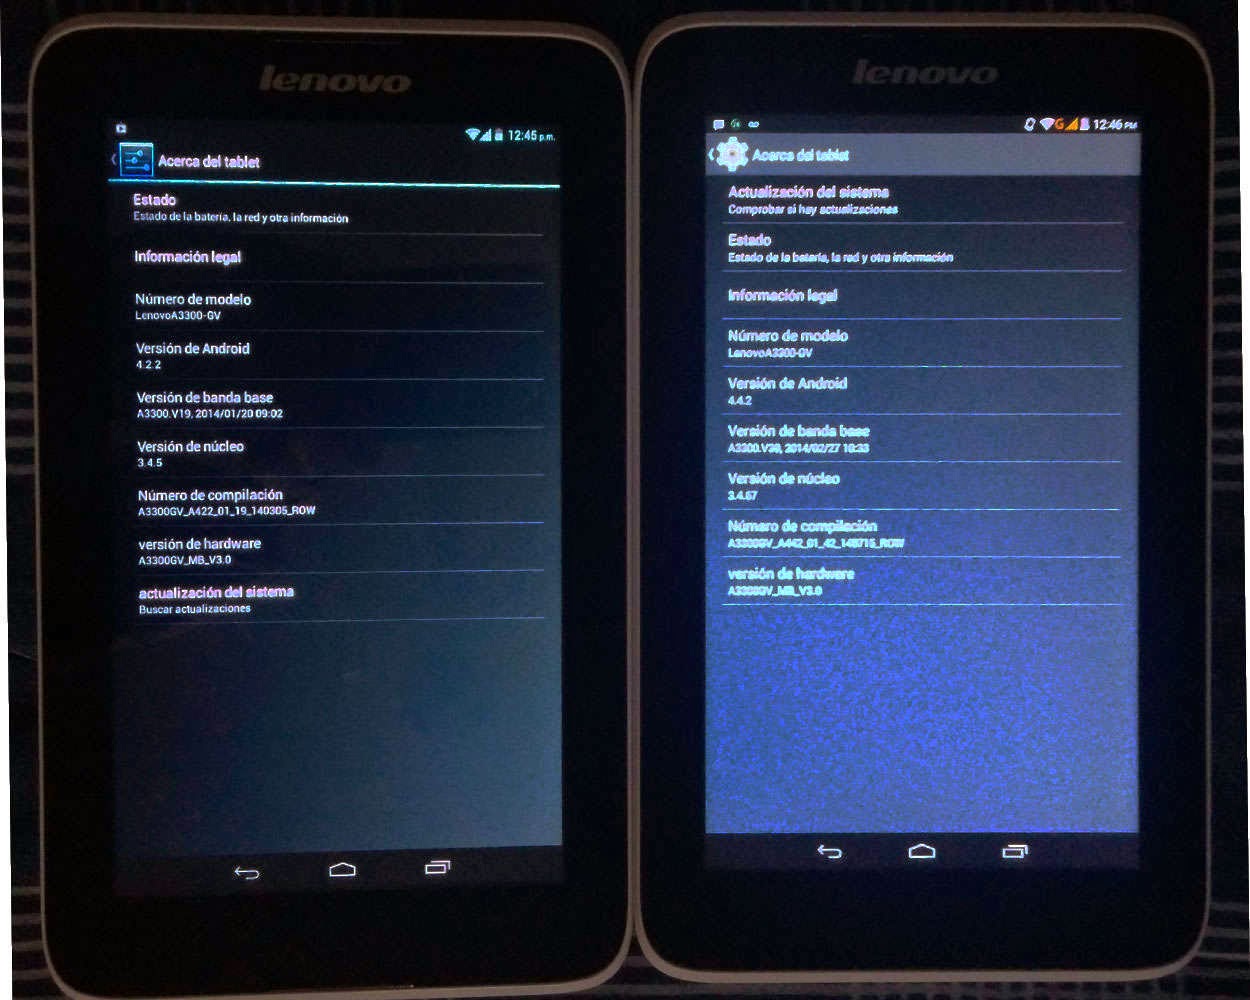 Download Stock ROM for Lenovo A3300 GV / HV For Free Without Survey